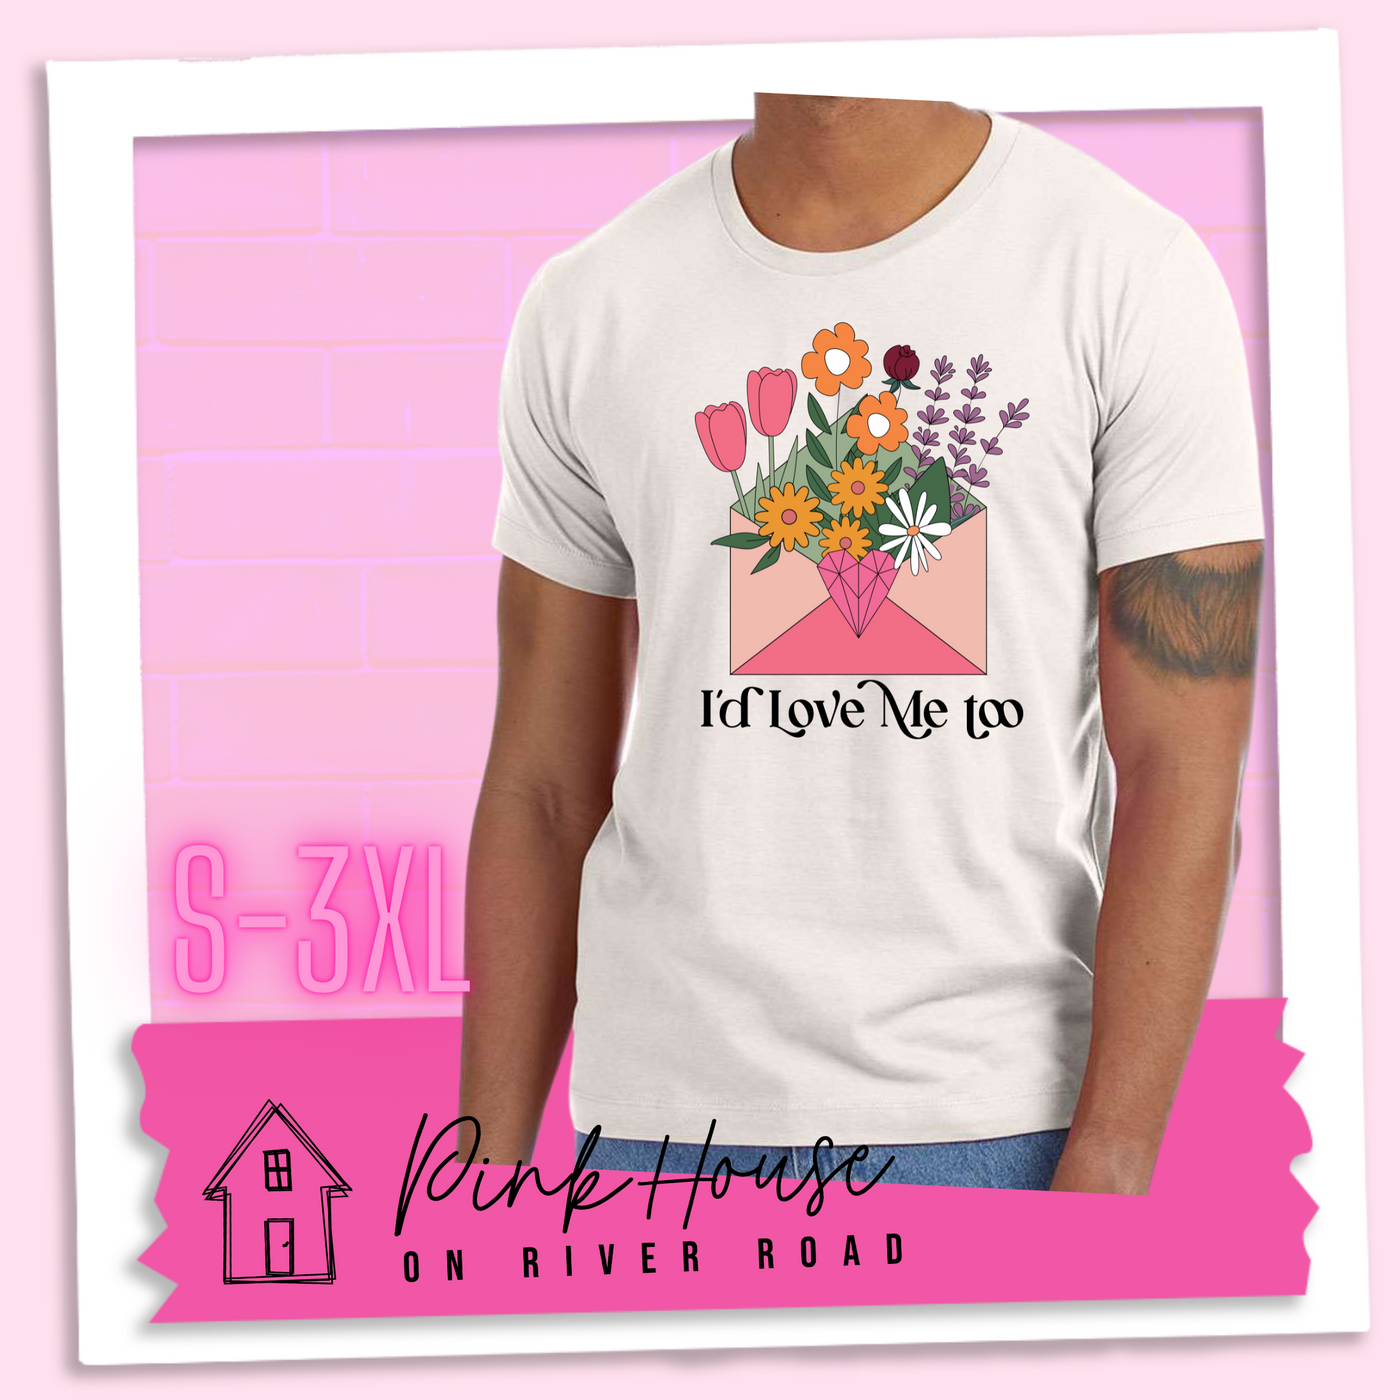 Dust tee with a graphic of a pink envelope filled with different types of flowers and a geometric heart seal. The text underneath reads "I'd Love Me Too"